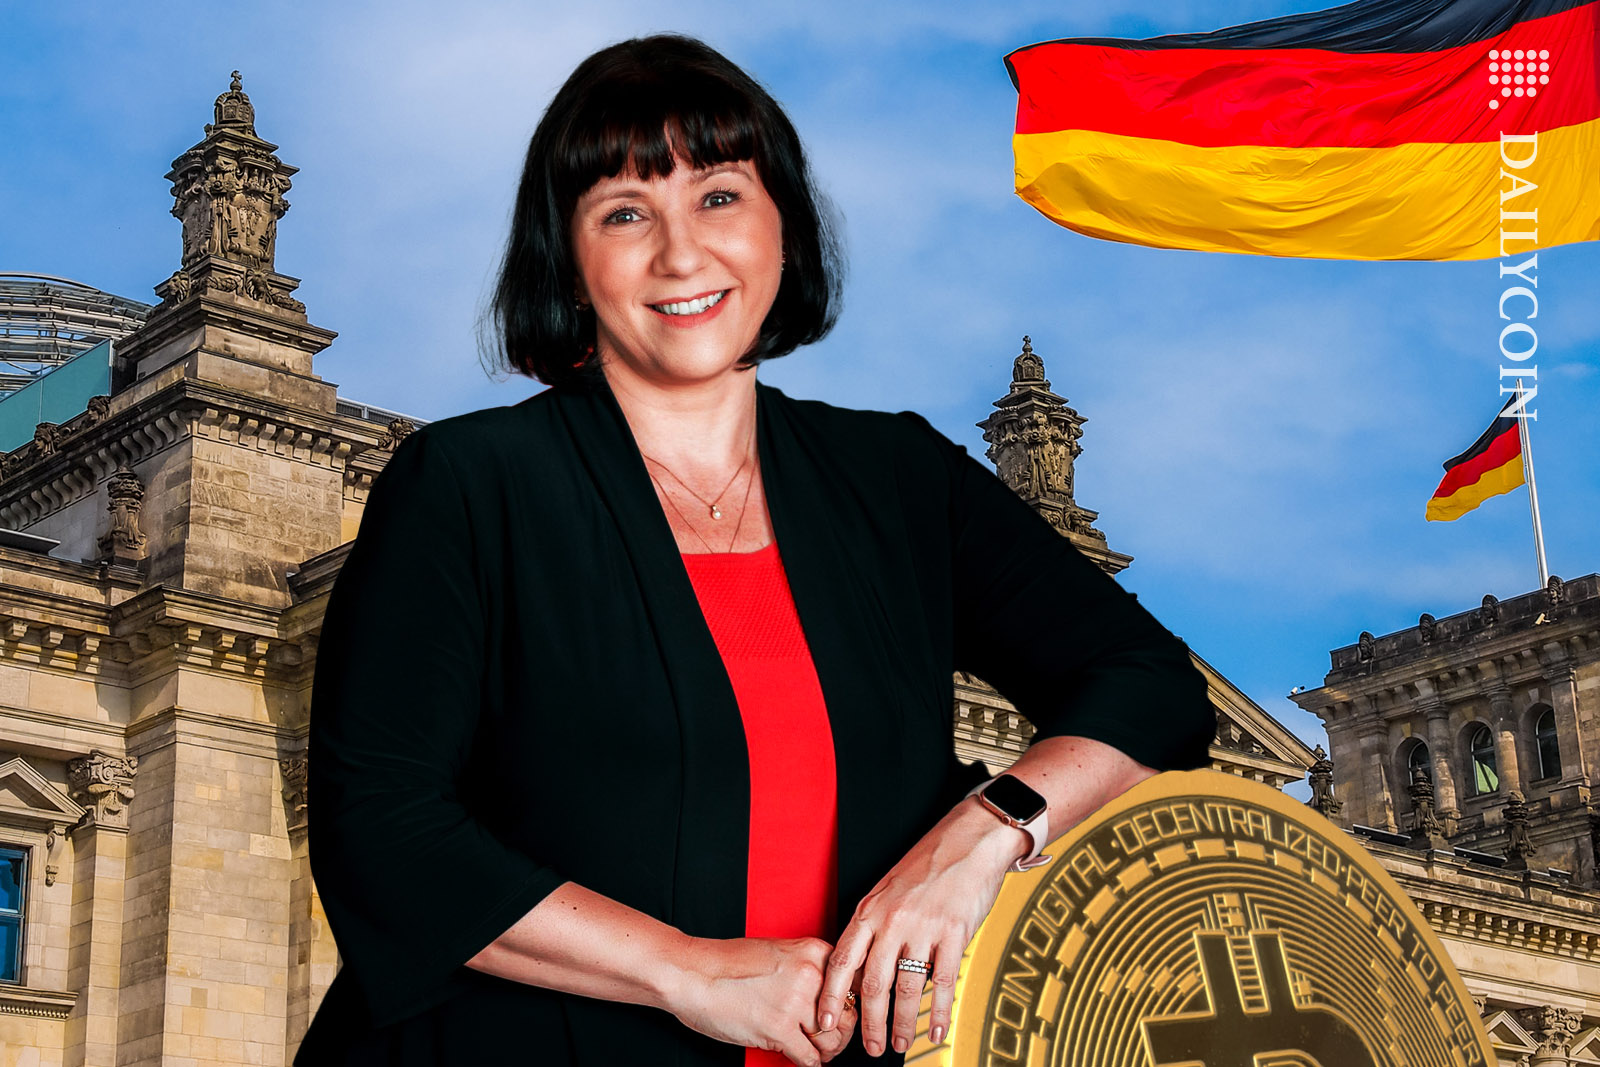 Joana Cotar standing happy leaning on Bitcoin outside of the Reichstag building.